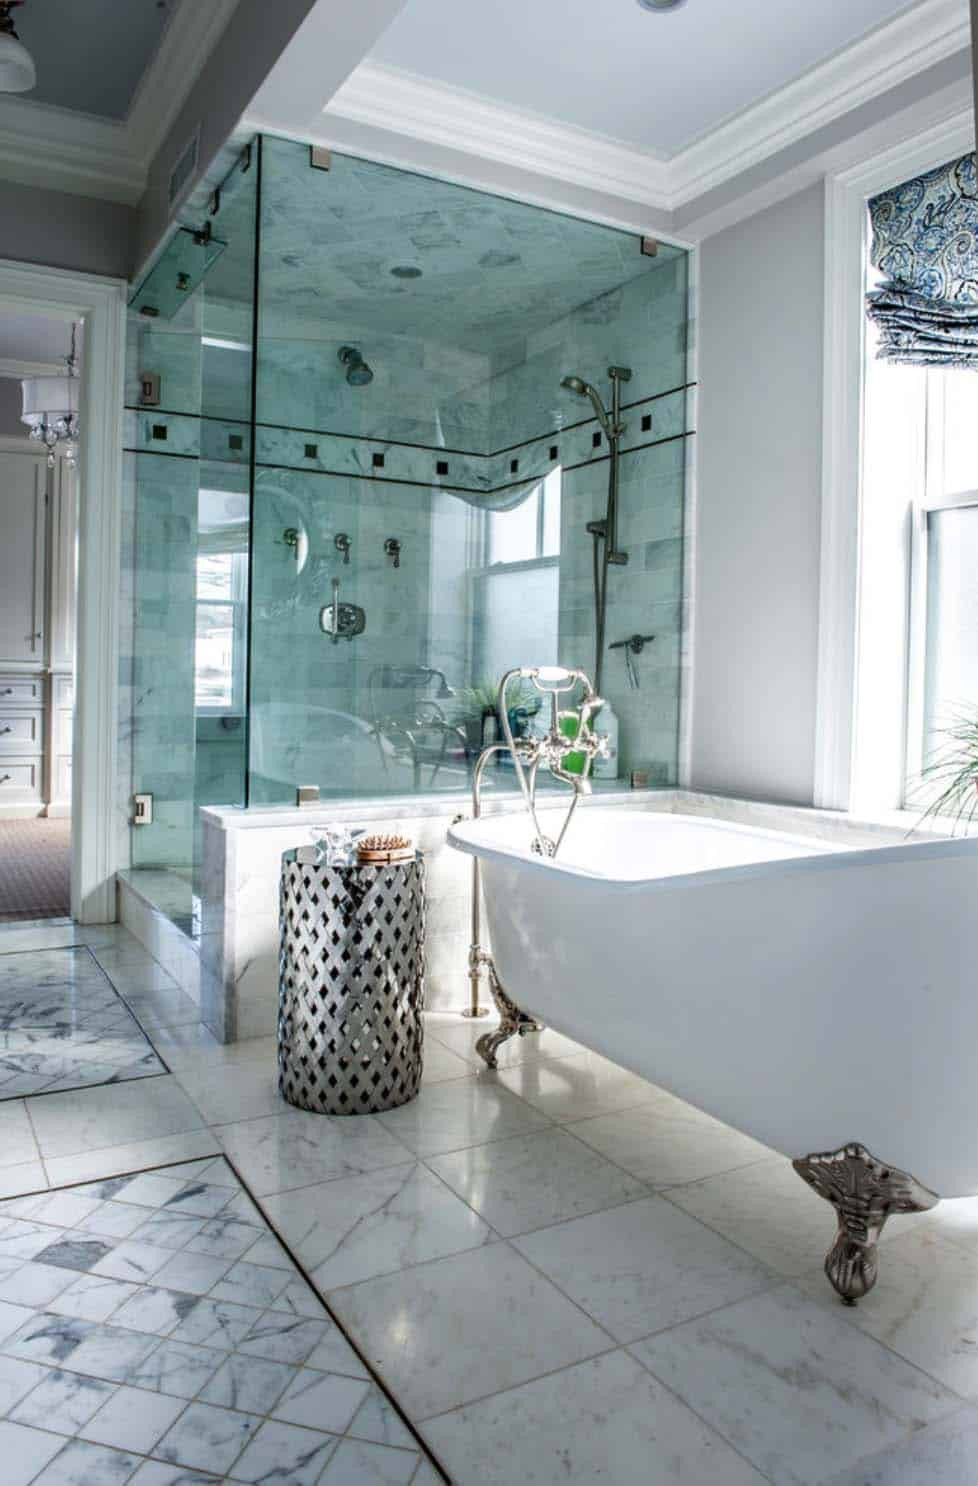 Bathroom Design Images
 53 Most fabulous traditional style bathroom designs ever